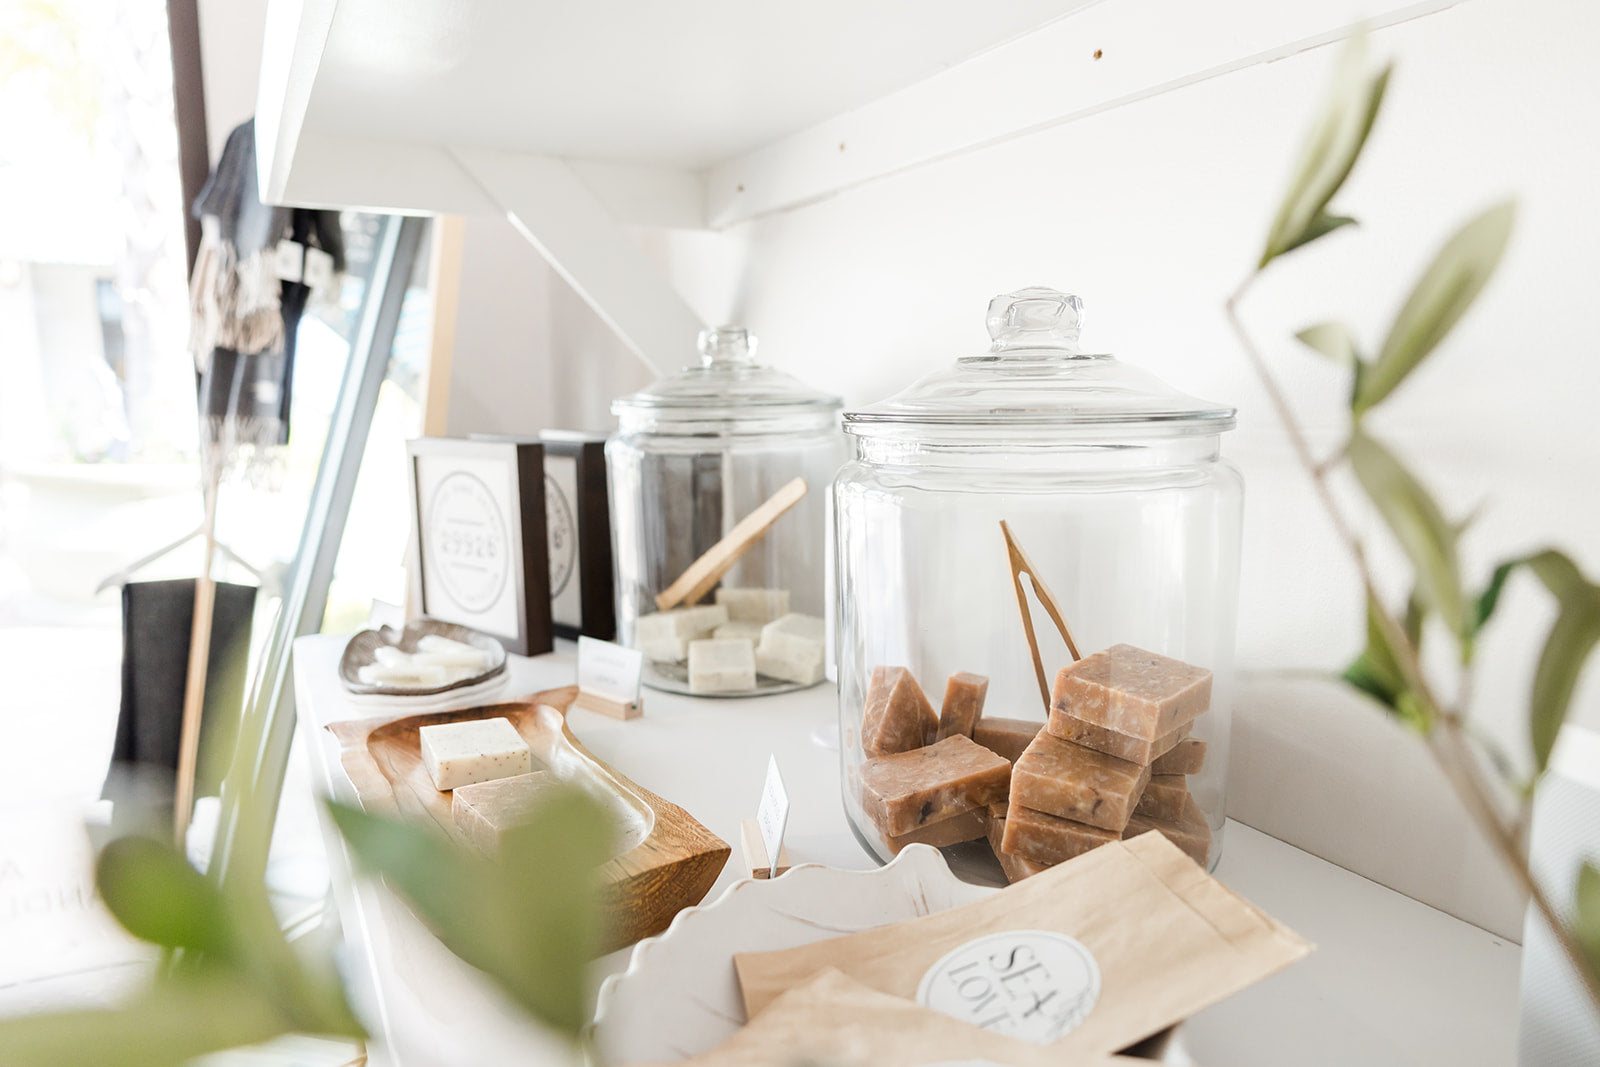 A serene and stylish shelf displaying an array of self-care products, including two glass jars—one open with wooden tongs inside—and eco-friendly soaps, all bathed in soft, natural light.